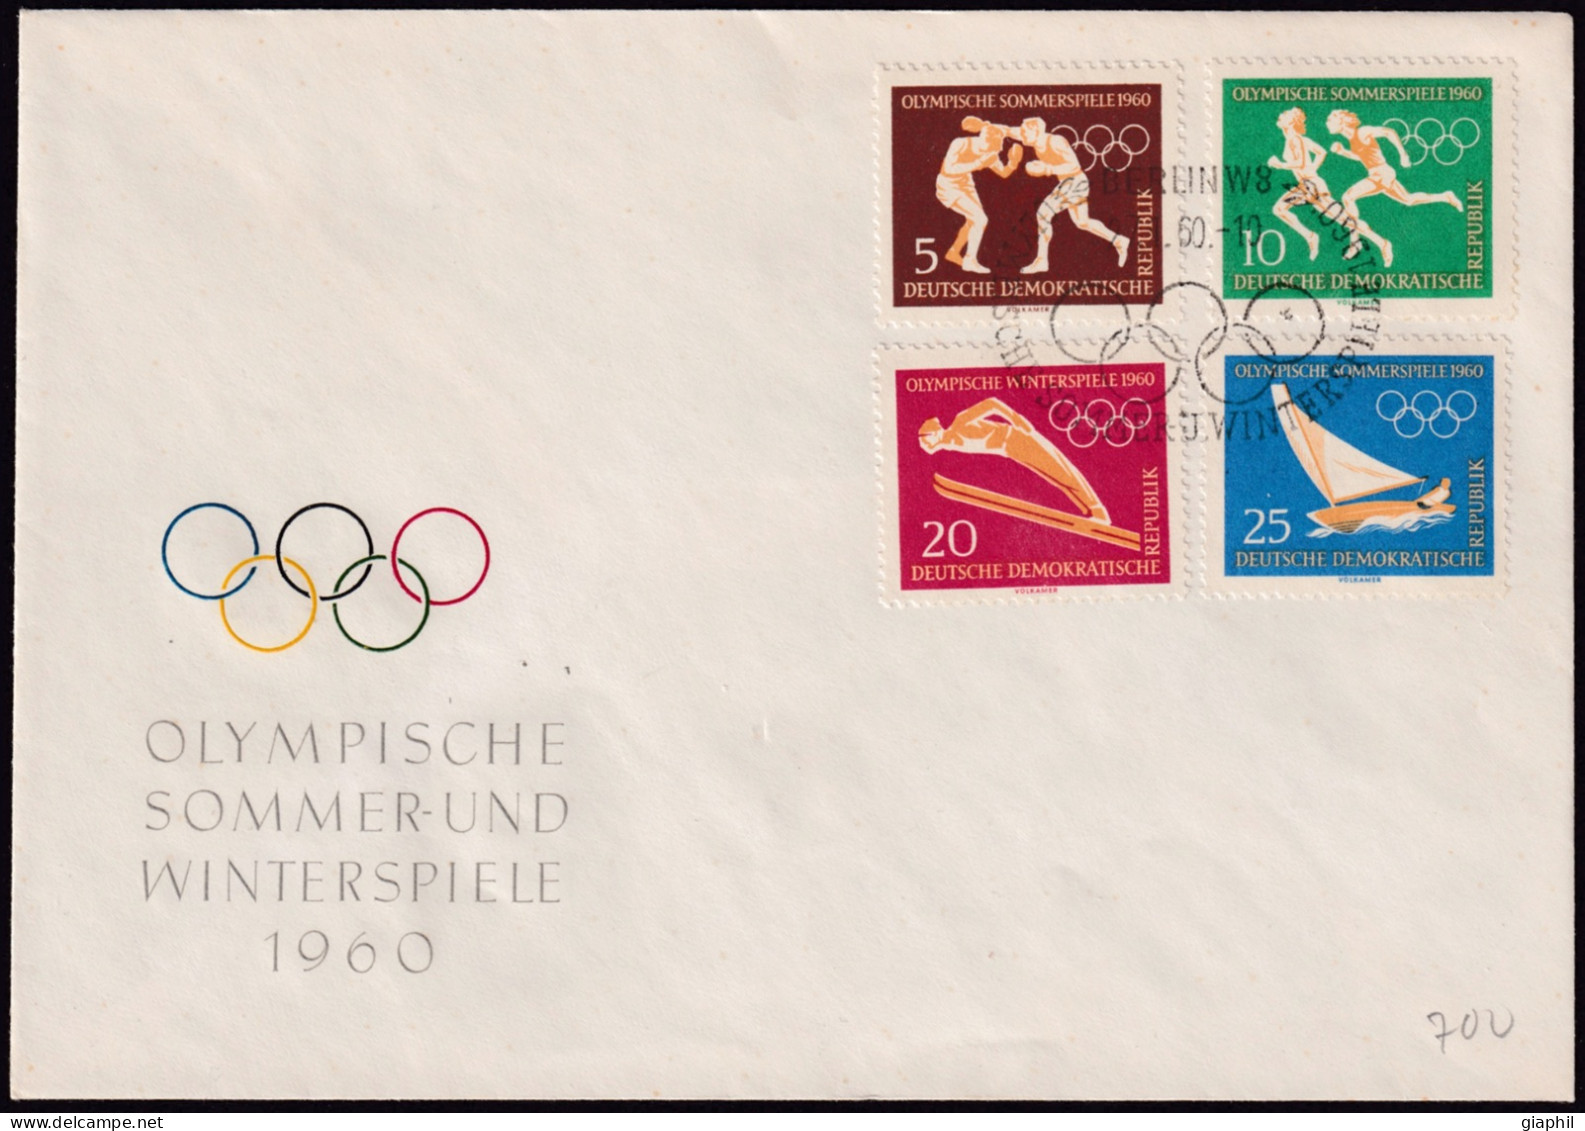 GERMANY EAST - DDR 1960 FDC ROME OLYMPIC GAMES (Mi. 746-749)  OFFER! - Estate 1960: Roma